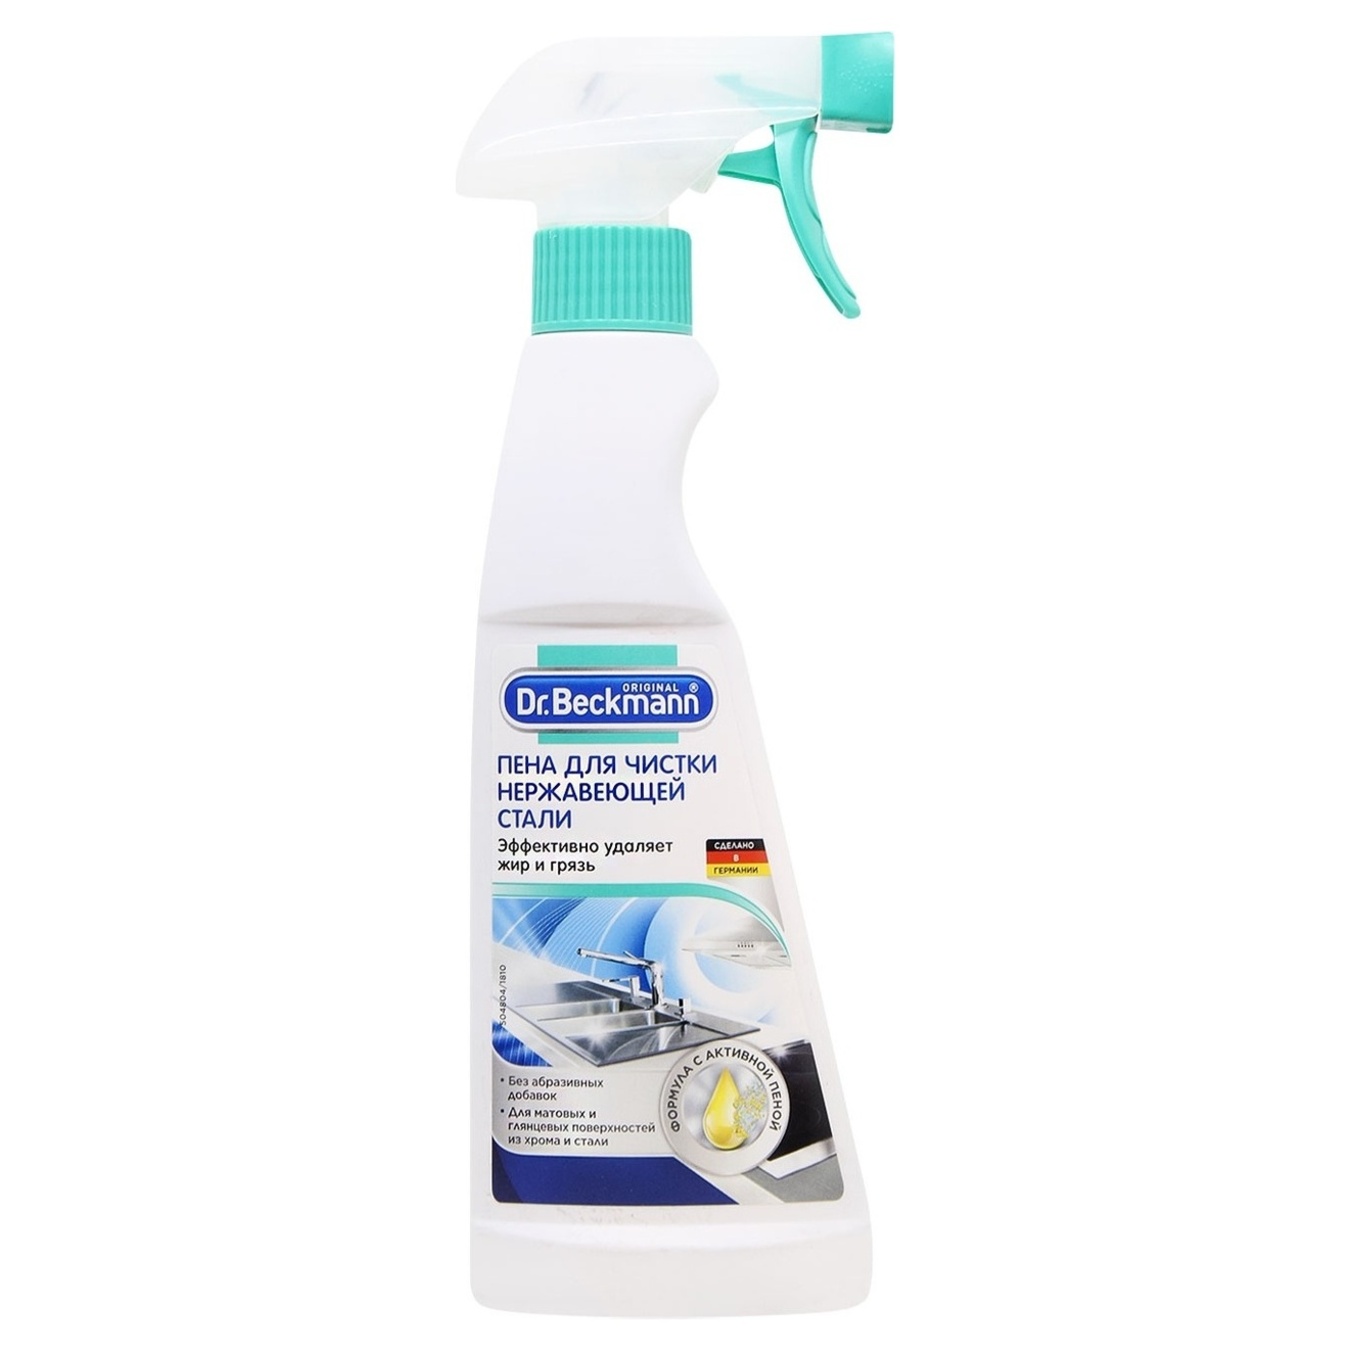 Dr. BECKMANN foam for cleaning stainless steel 250 ml